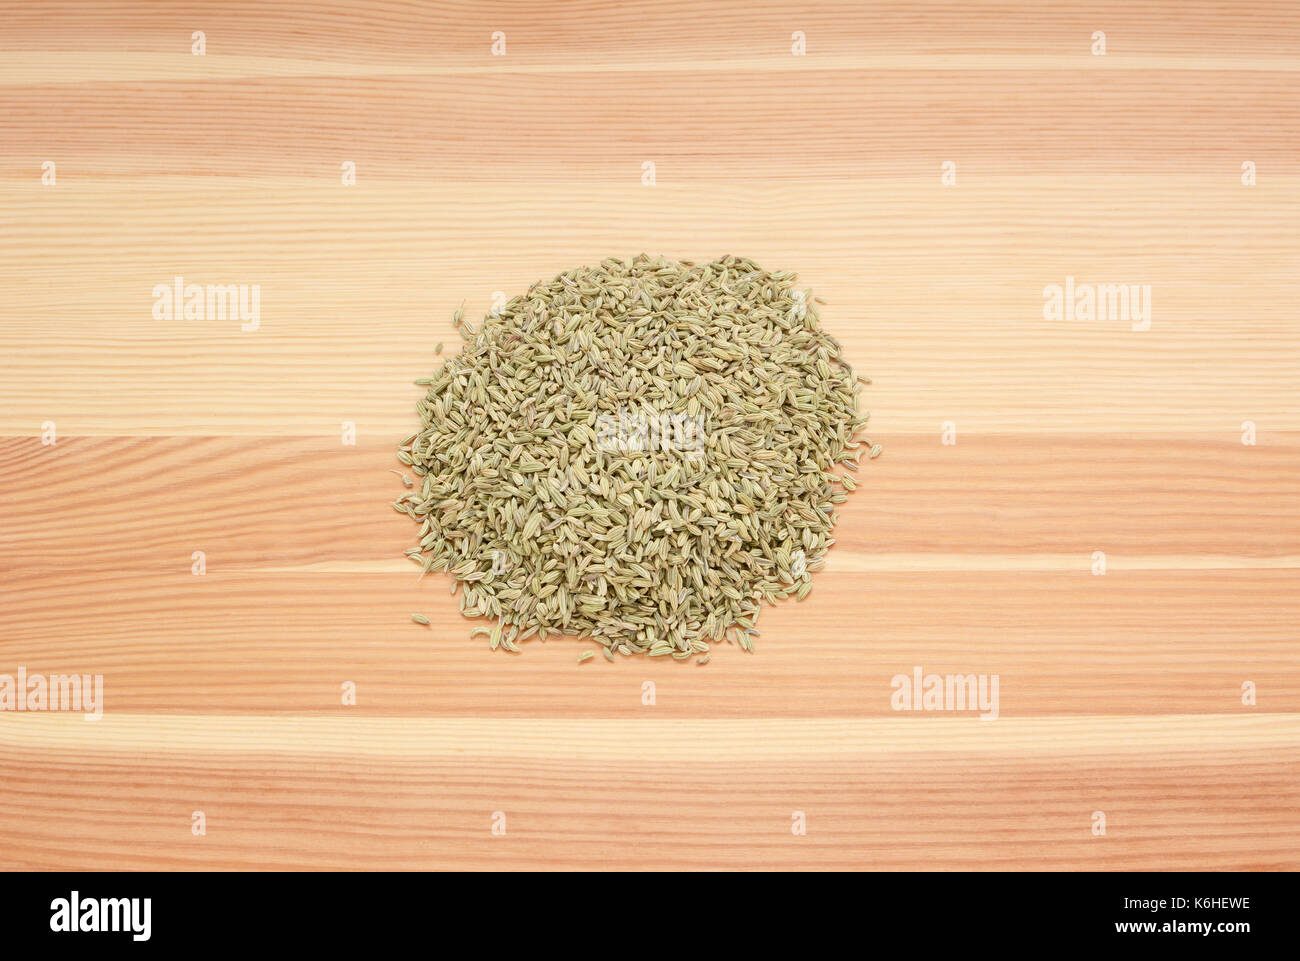 Heap of dried fennel seeds on a wooden background, pine wood grain Stock Photo